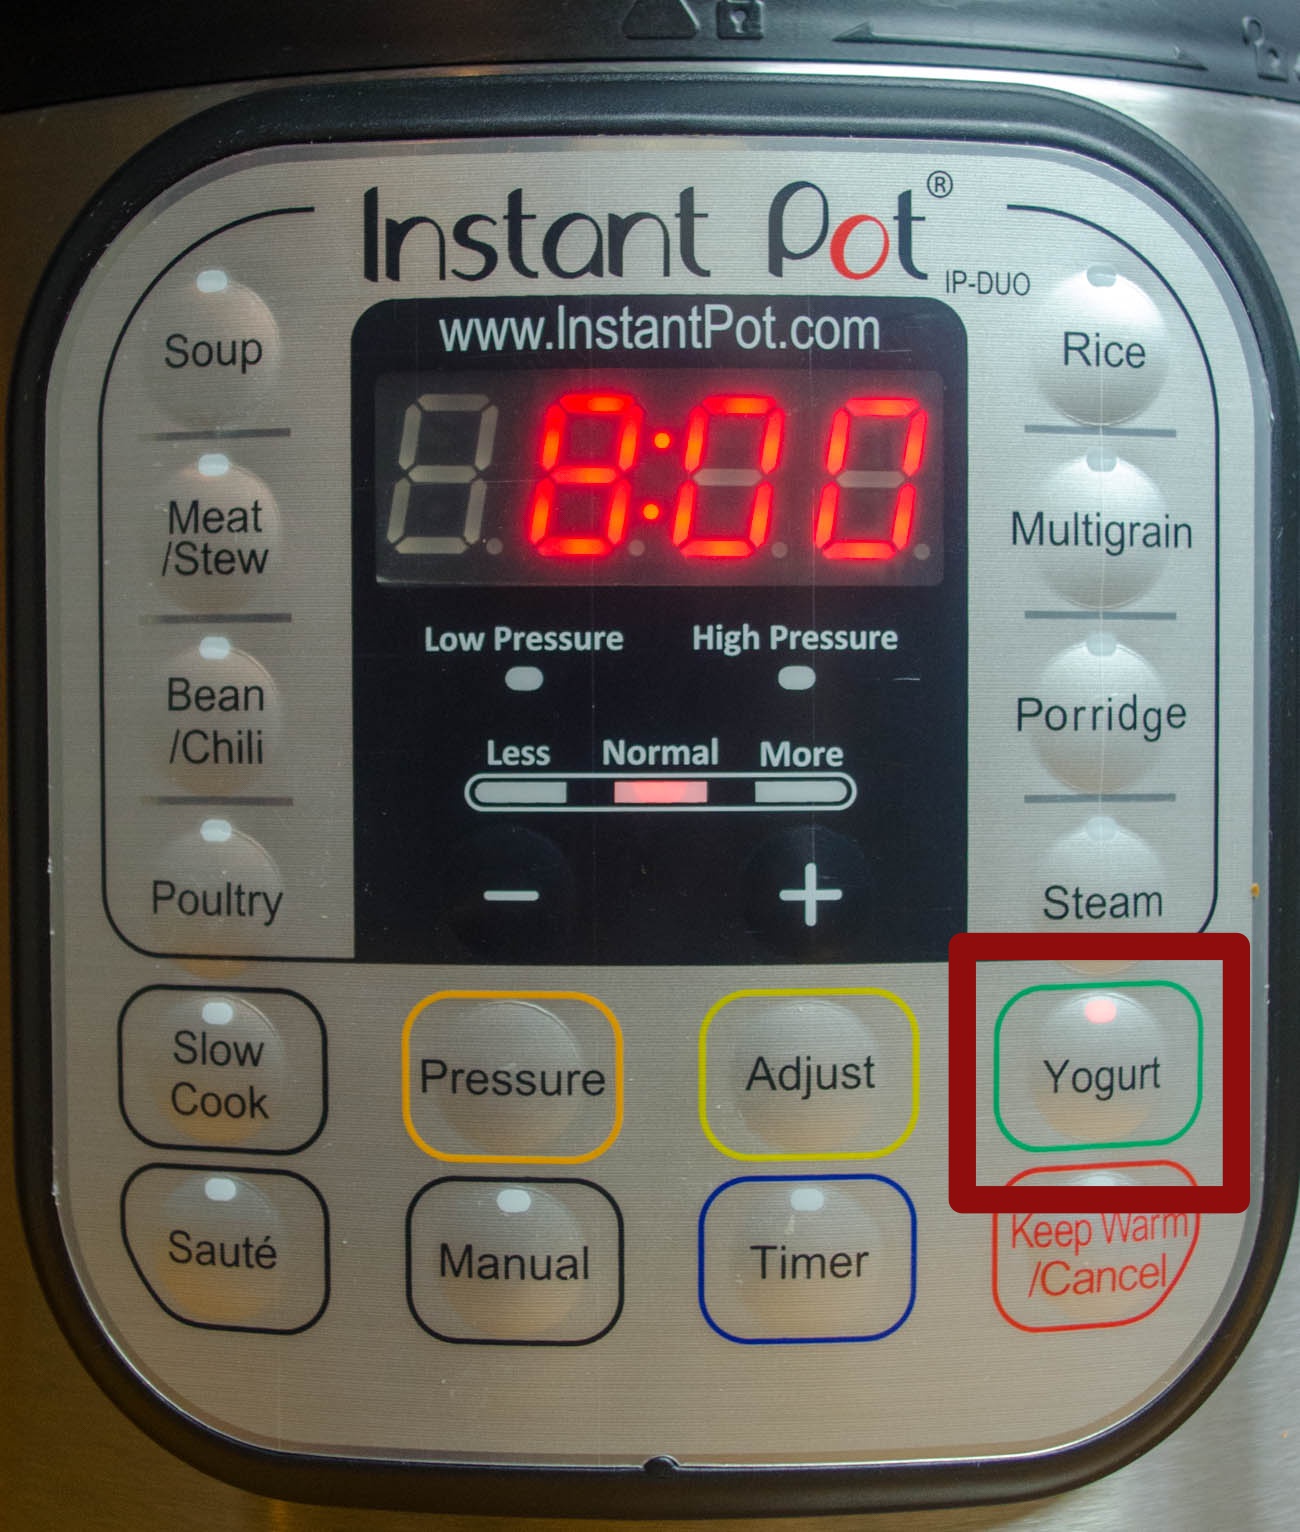 All About Your Instant Pot: How To Use All The Buttons | Page 3 | 12 ...